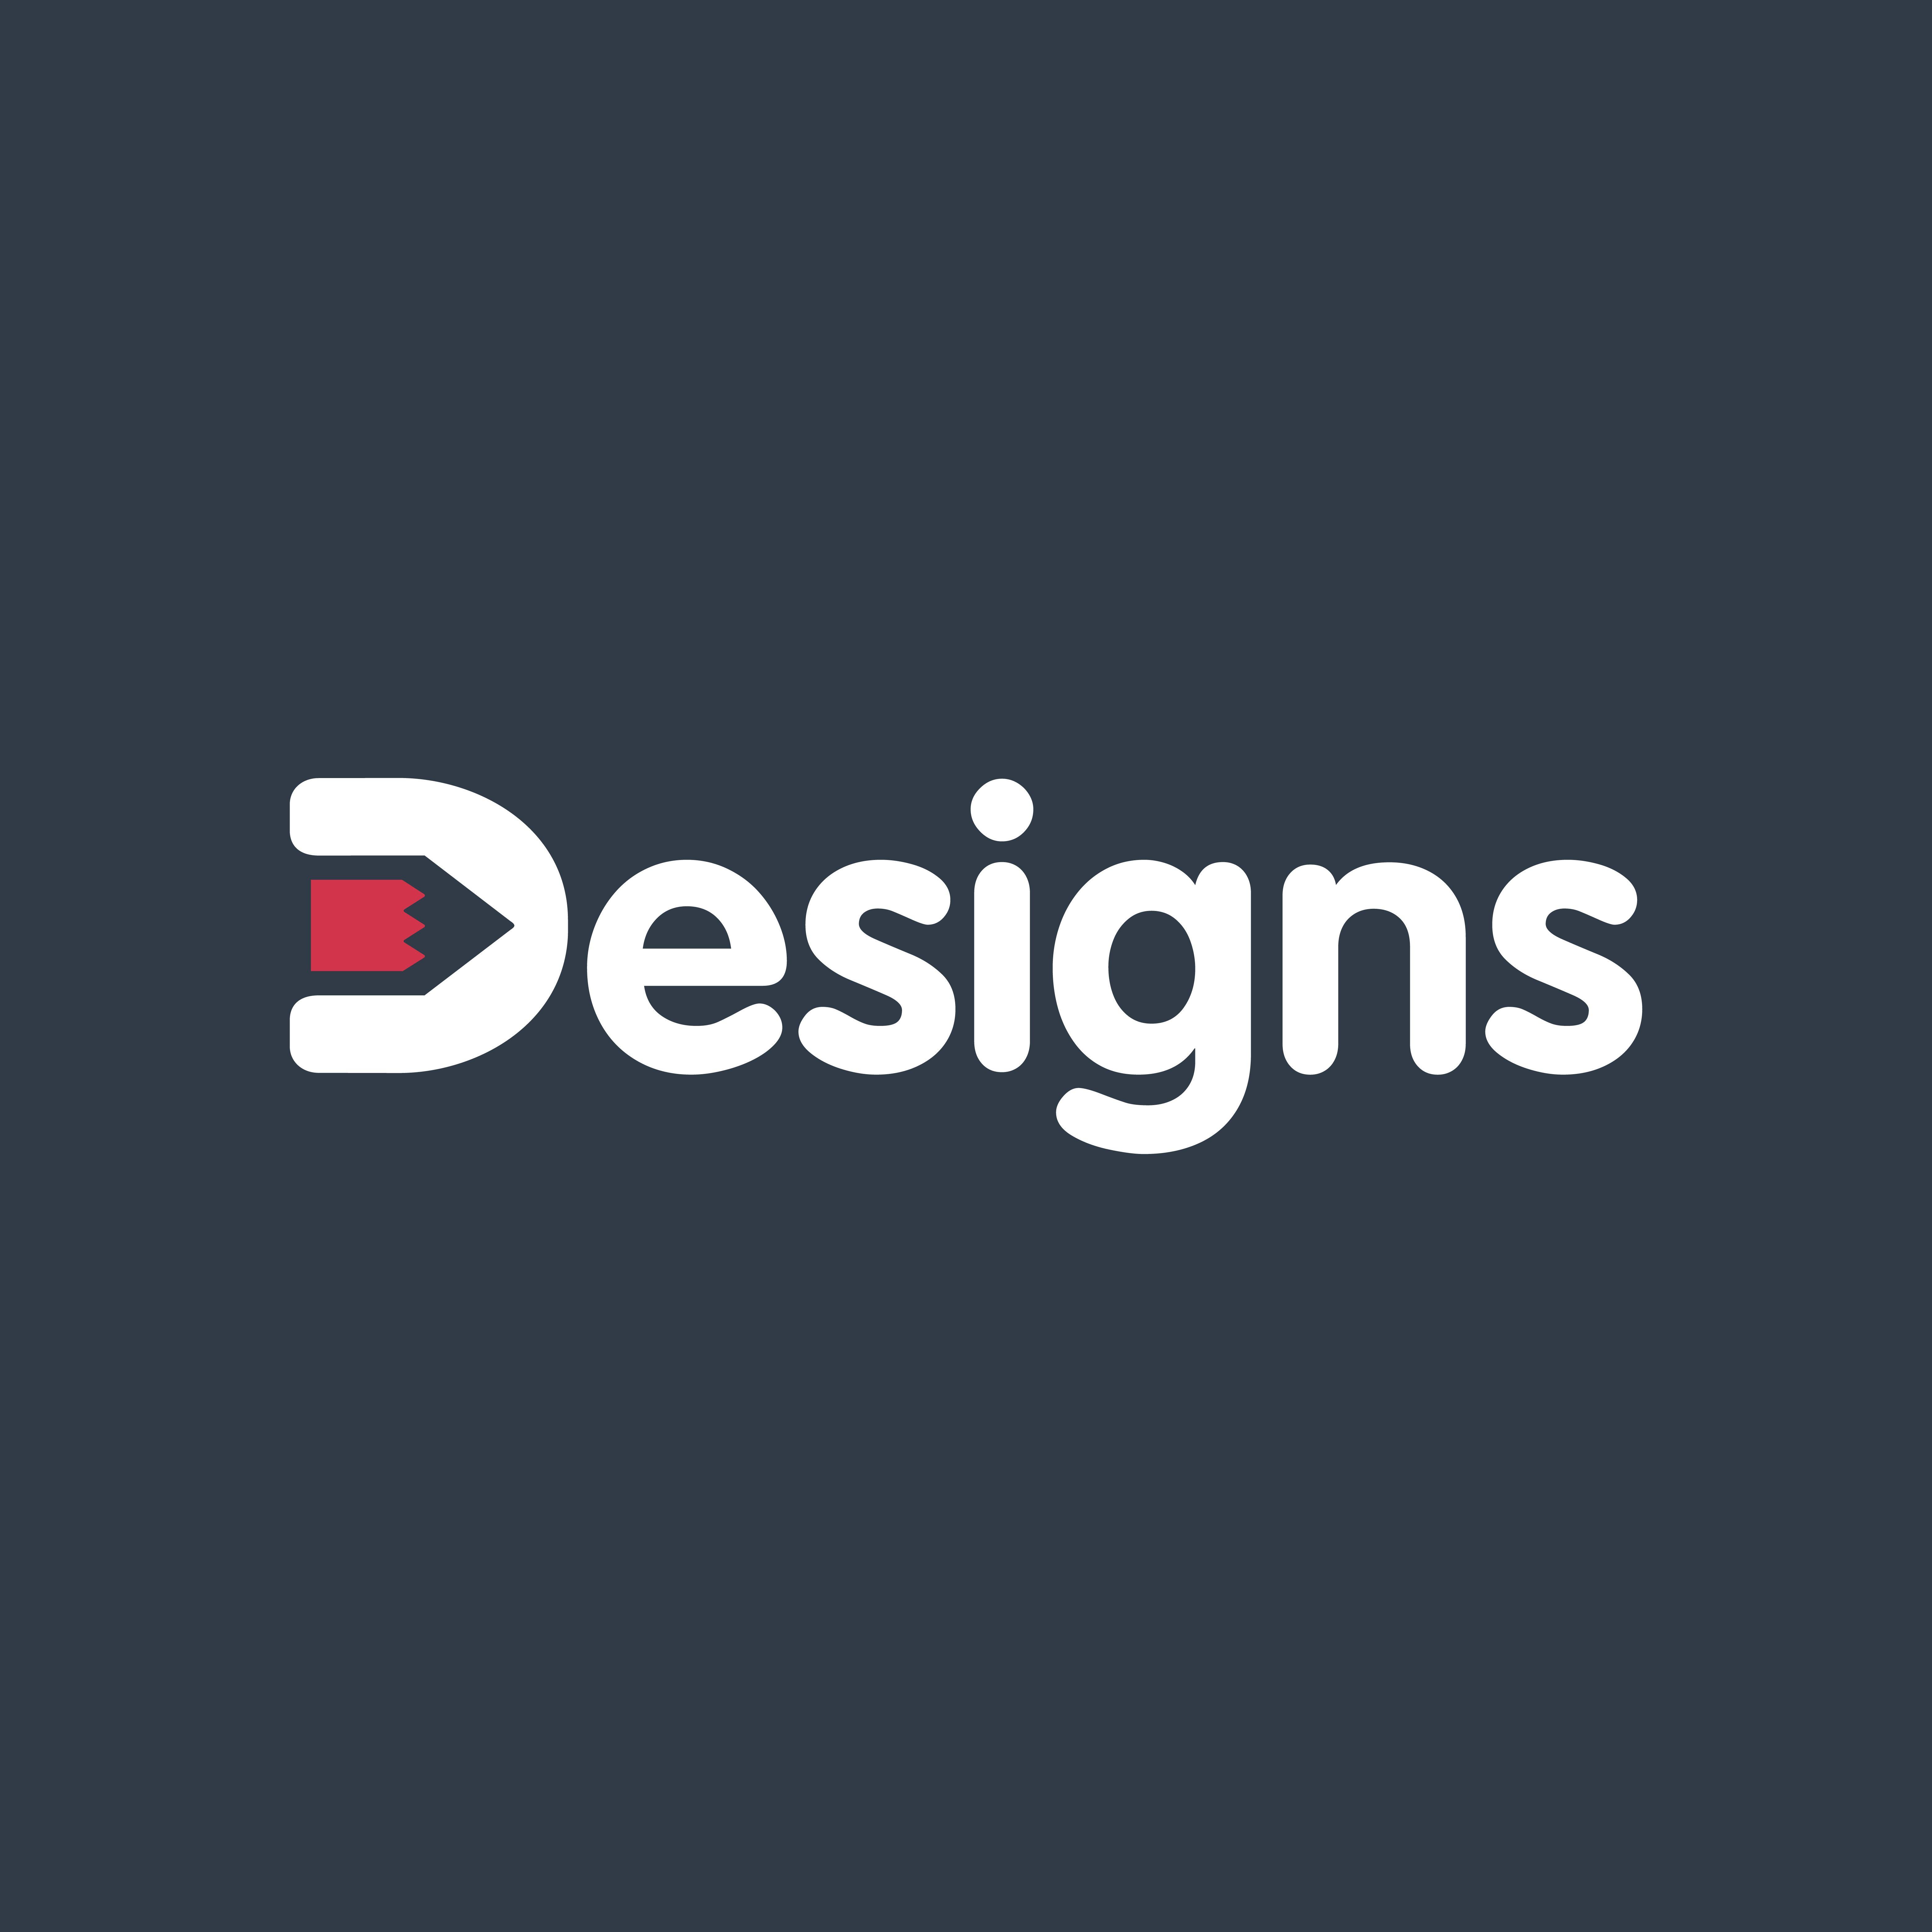 Designers Logo - Templates, Themes, Logos, Fonts And More | Designs.net